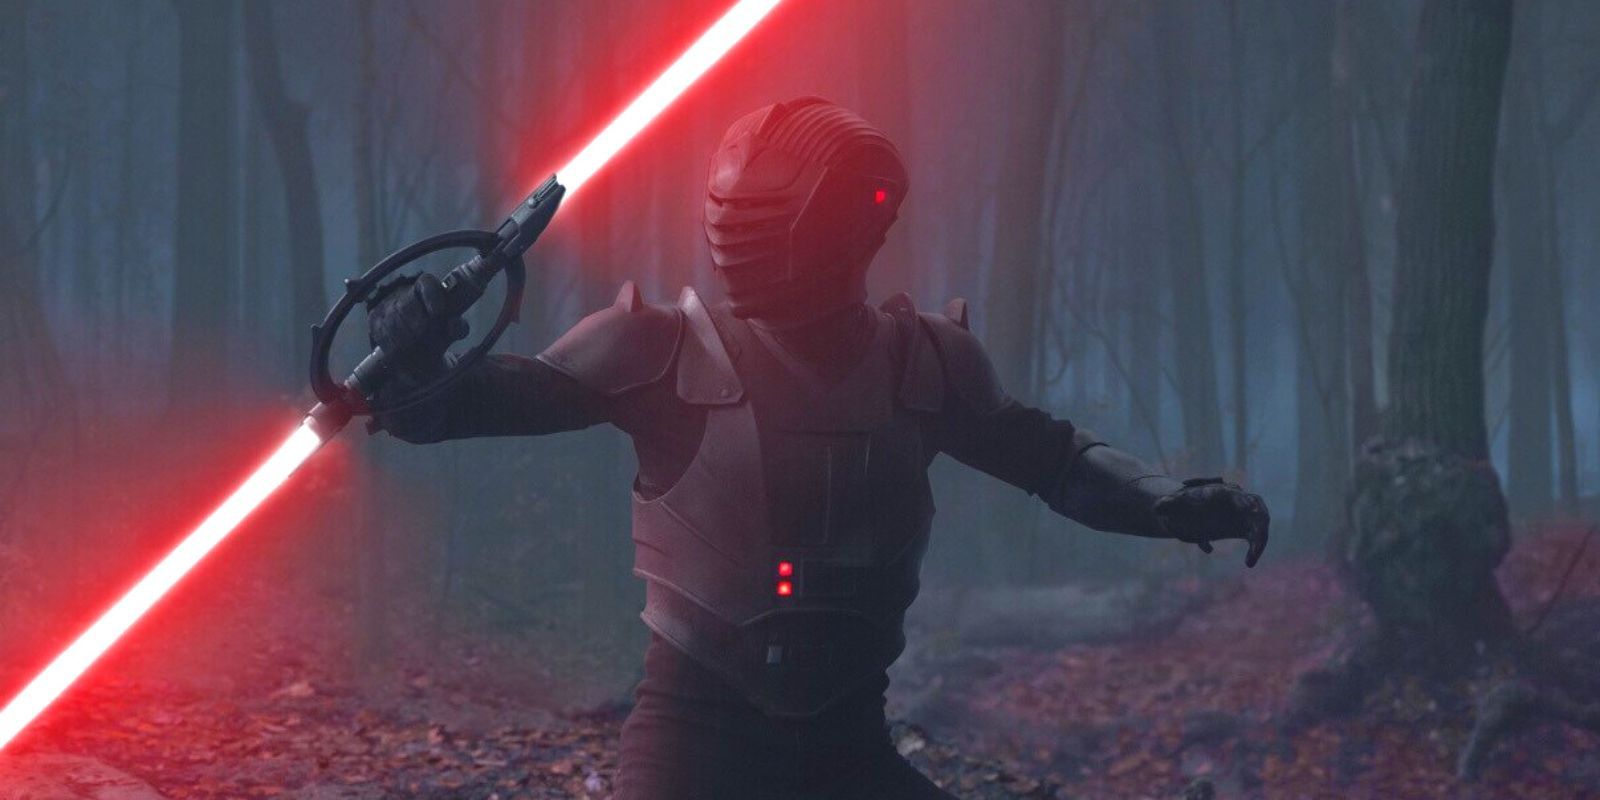 An Inquisitor with a double-bladed lightsaber